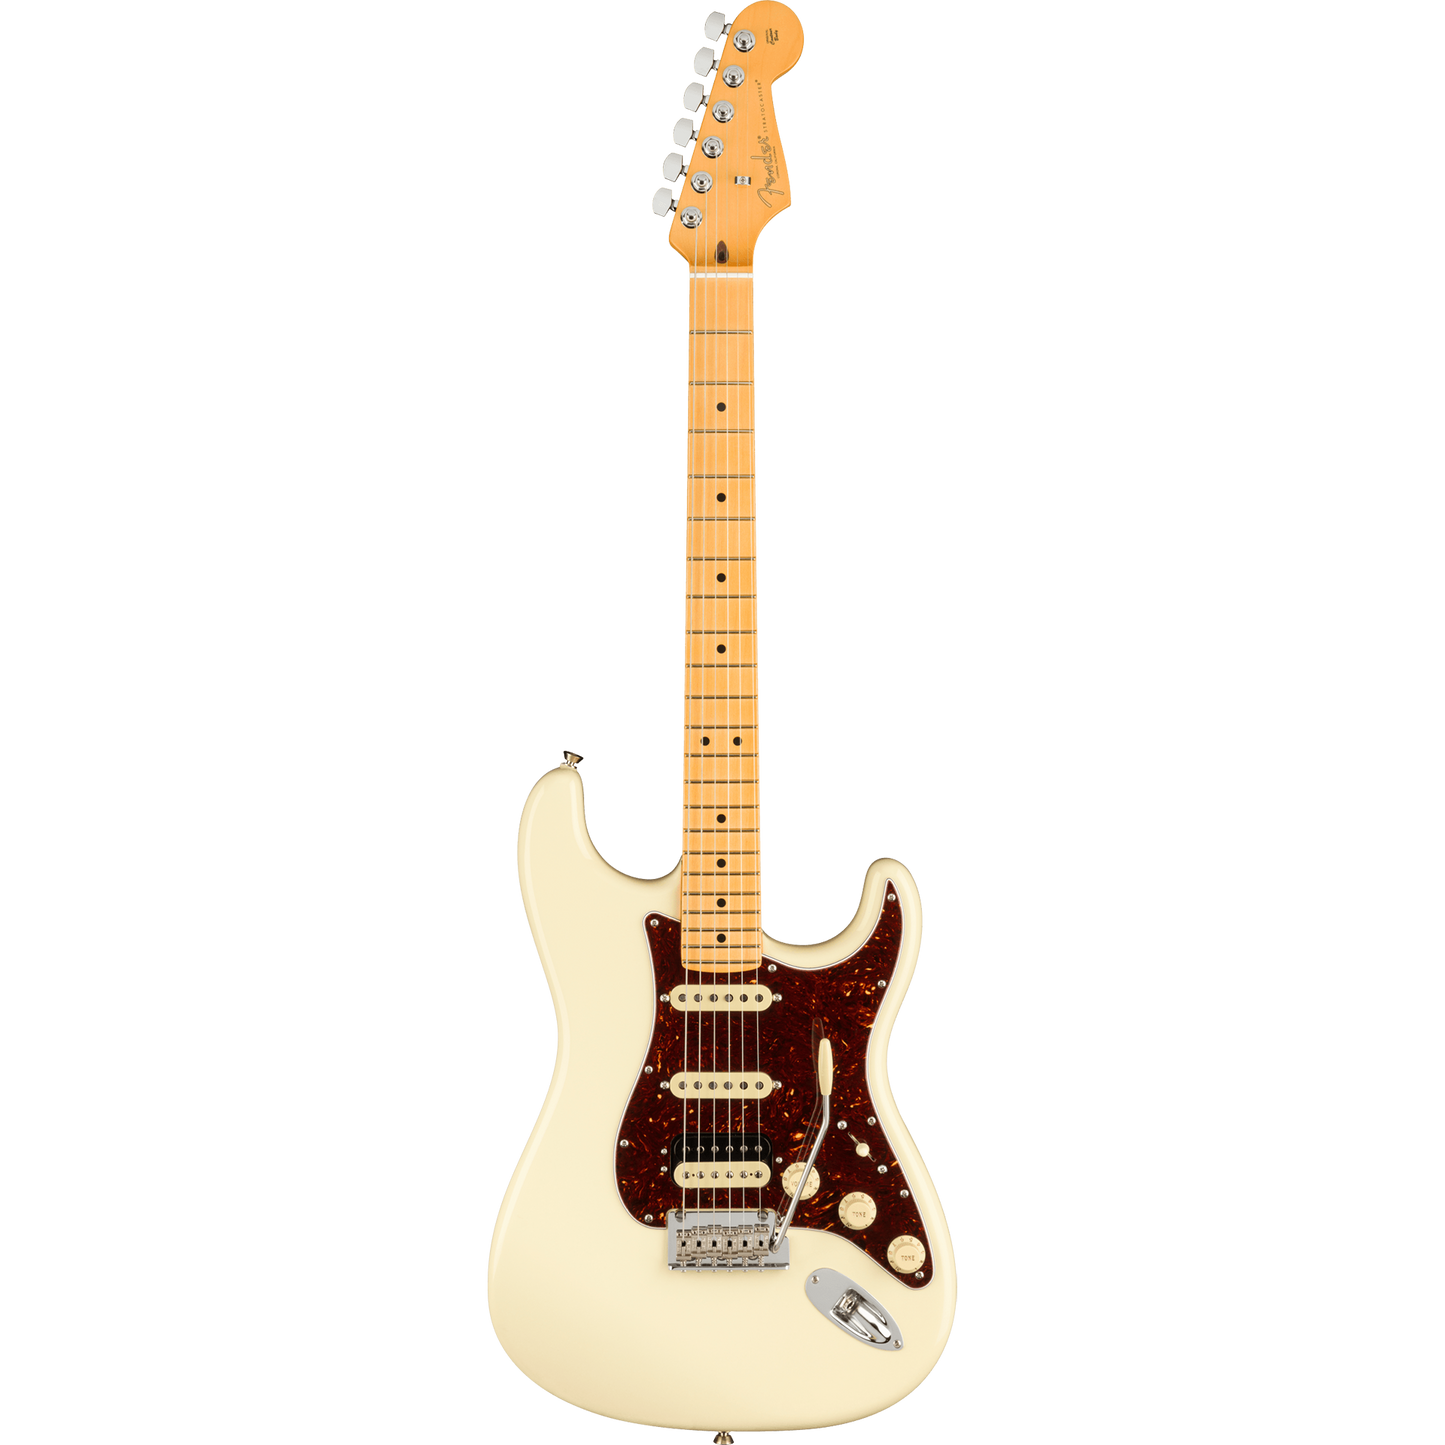 Fender American Professional II Stratocaster HSS - Olympic White